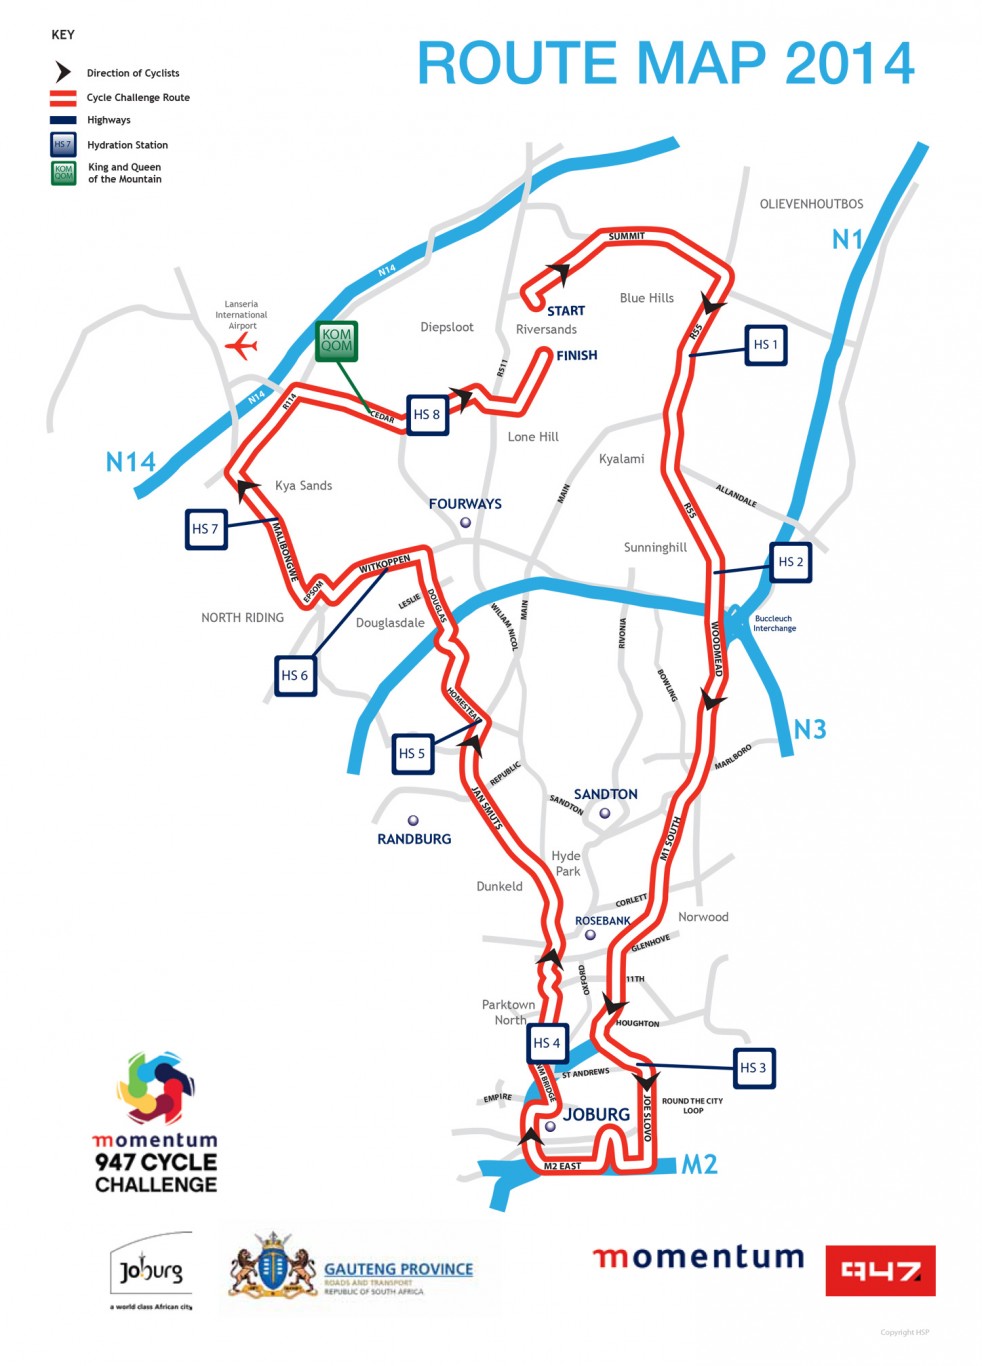 TomTom provide route maps for the Momentum 94.7 Cycle Challenge